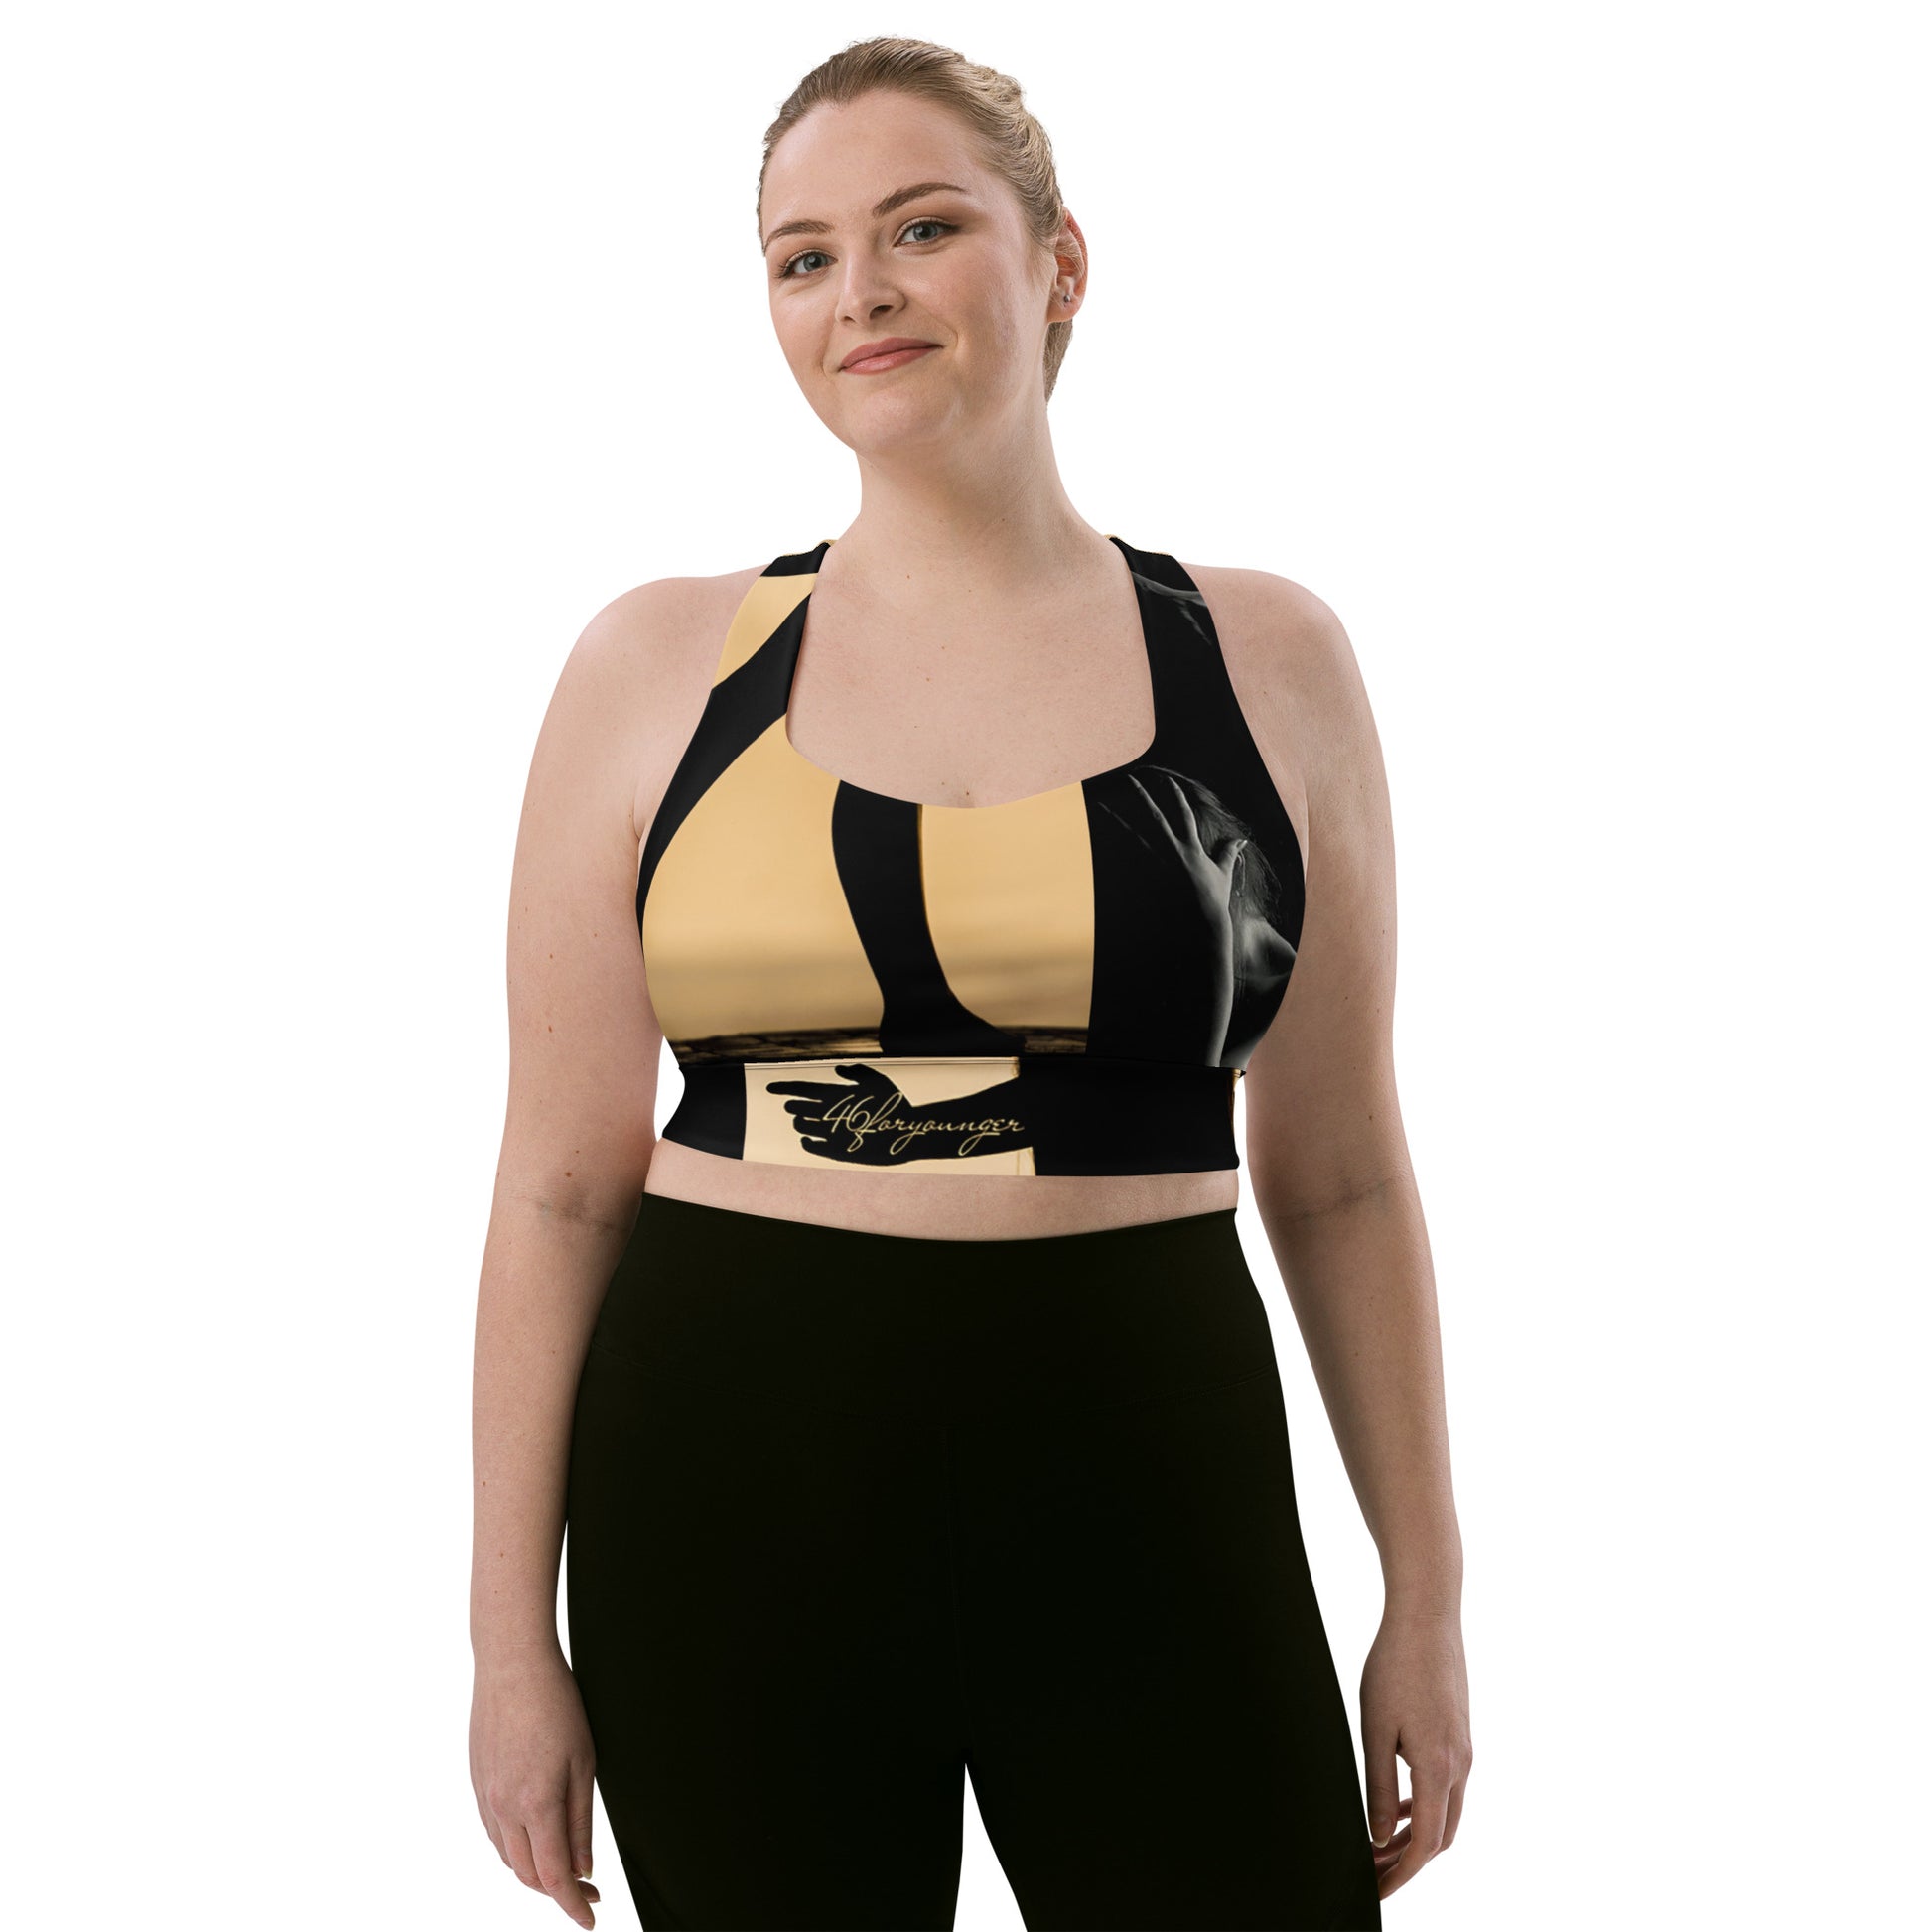 A-Ray of Emotions Sports Bra: Empowering artistic journey, fueling creativity with profound emotions. Plus Size